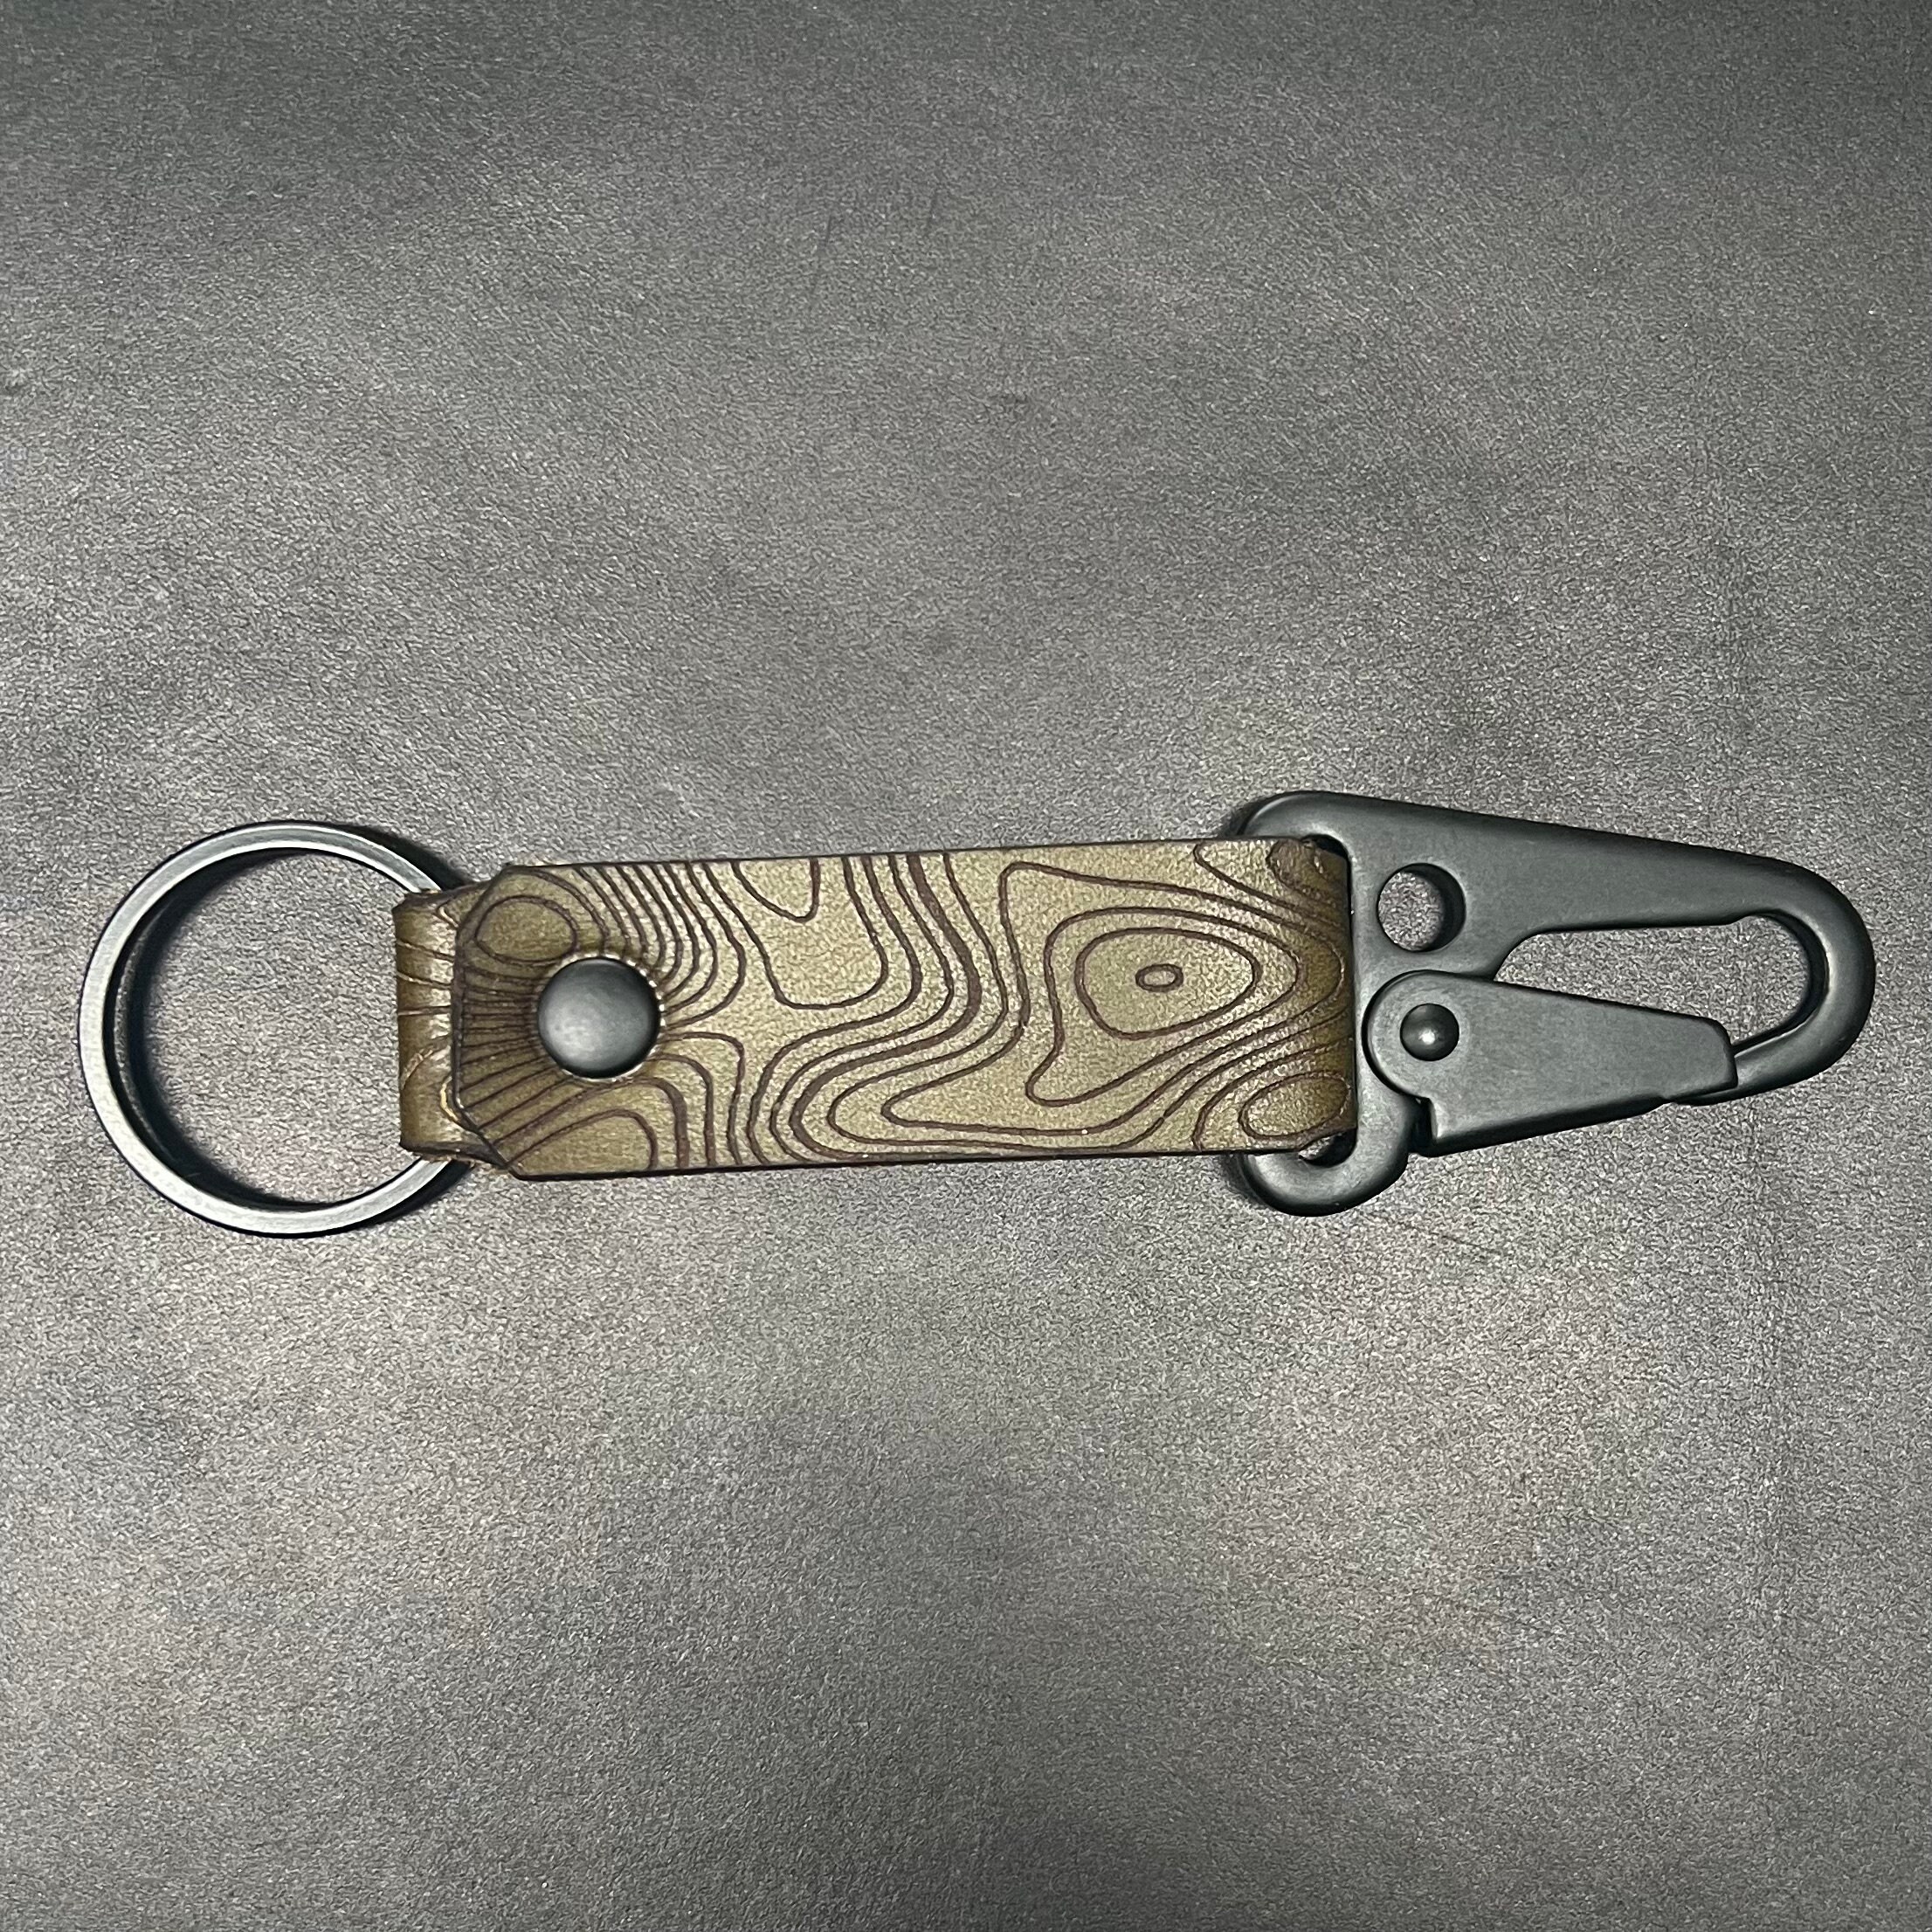 Appalachian Lever Clip Leather Tactical Key Chain Horween Leather 